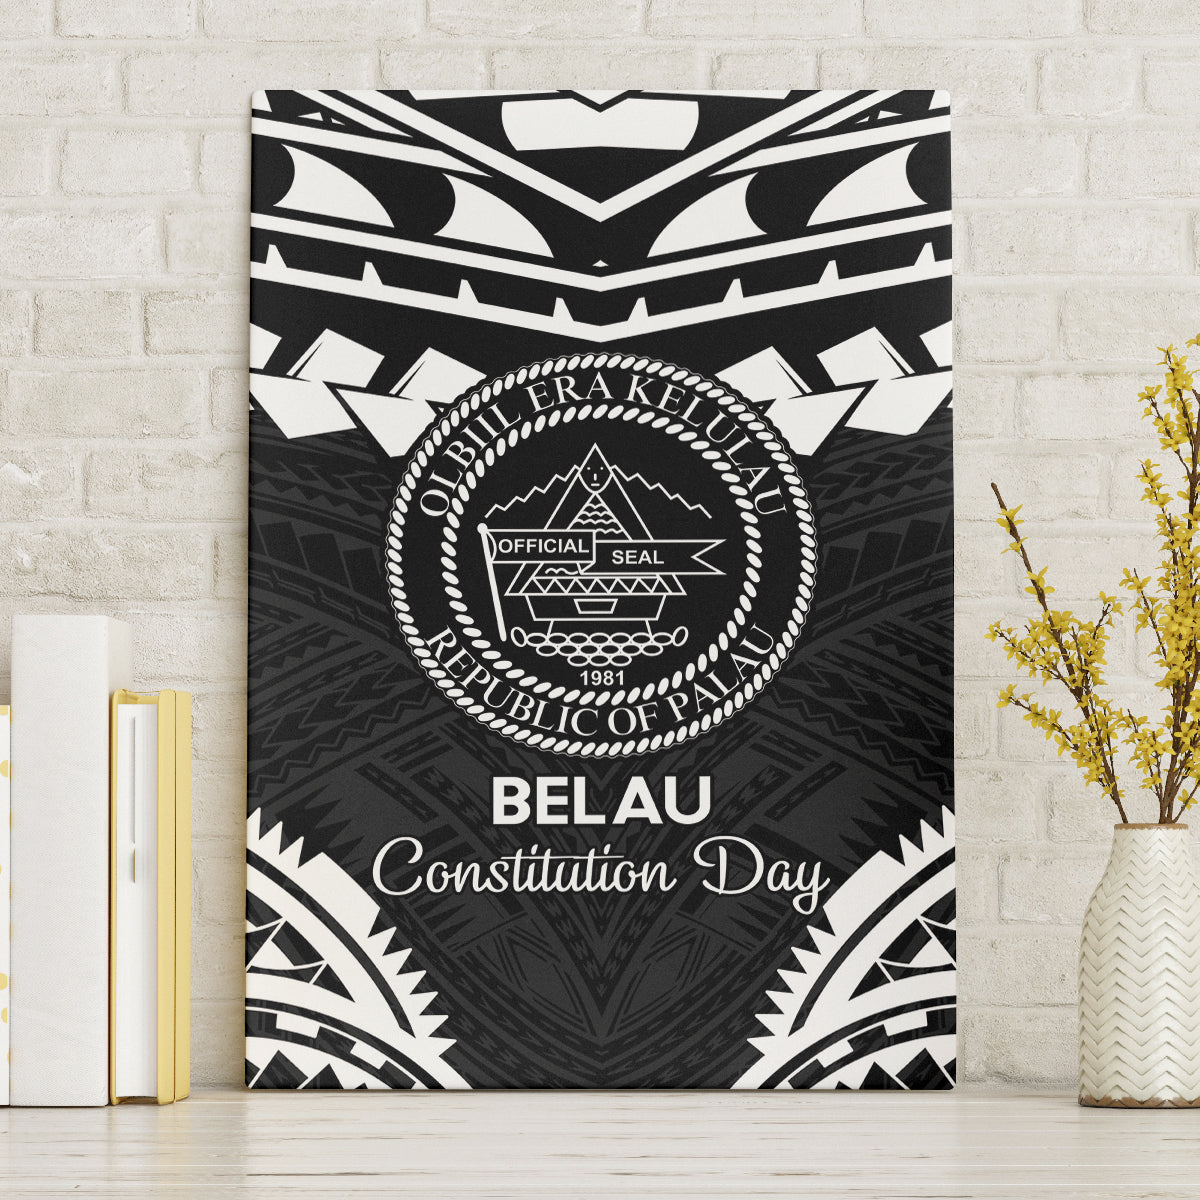 Palau Constitution Day Canvas Wall Art Belau Seal With Polynesian Pattern - Black